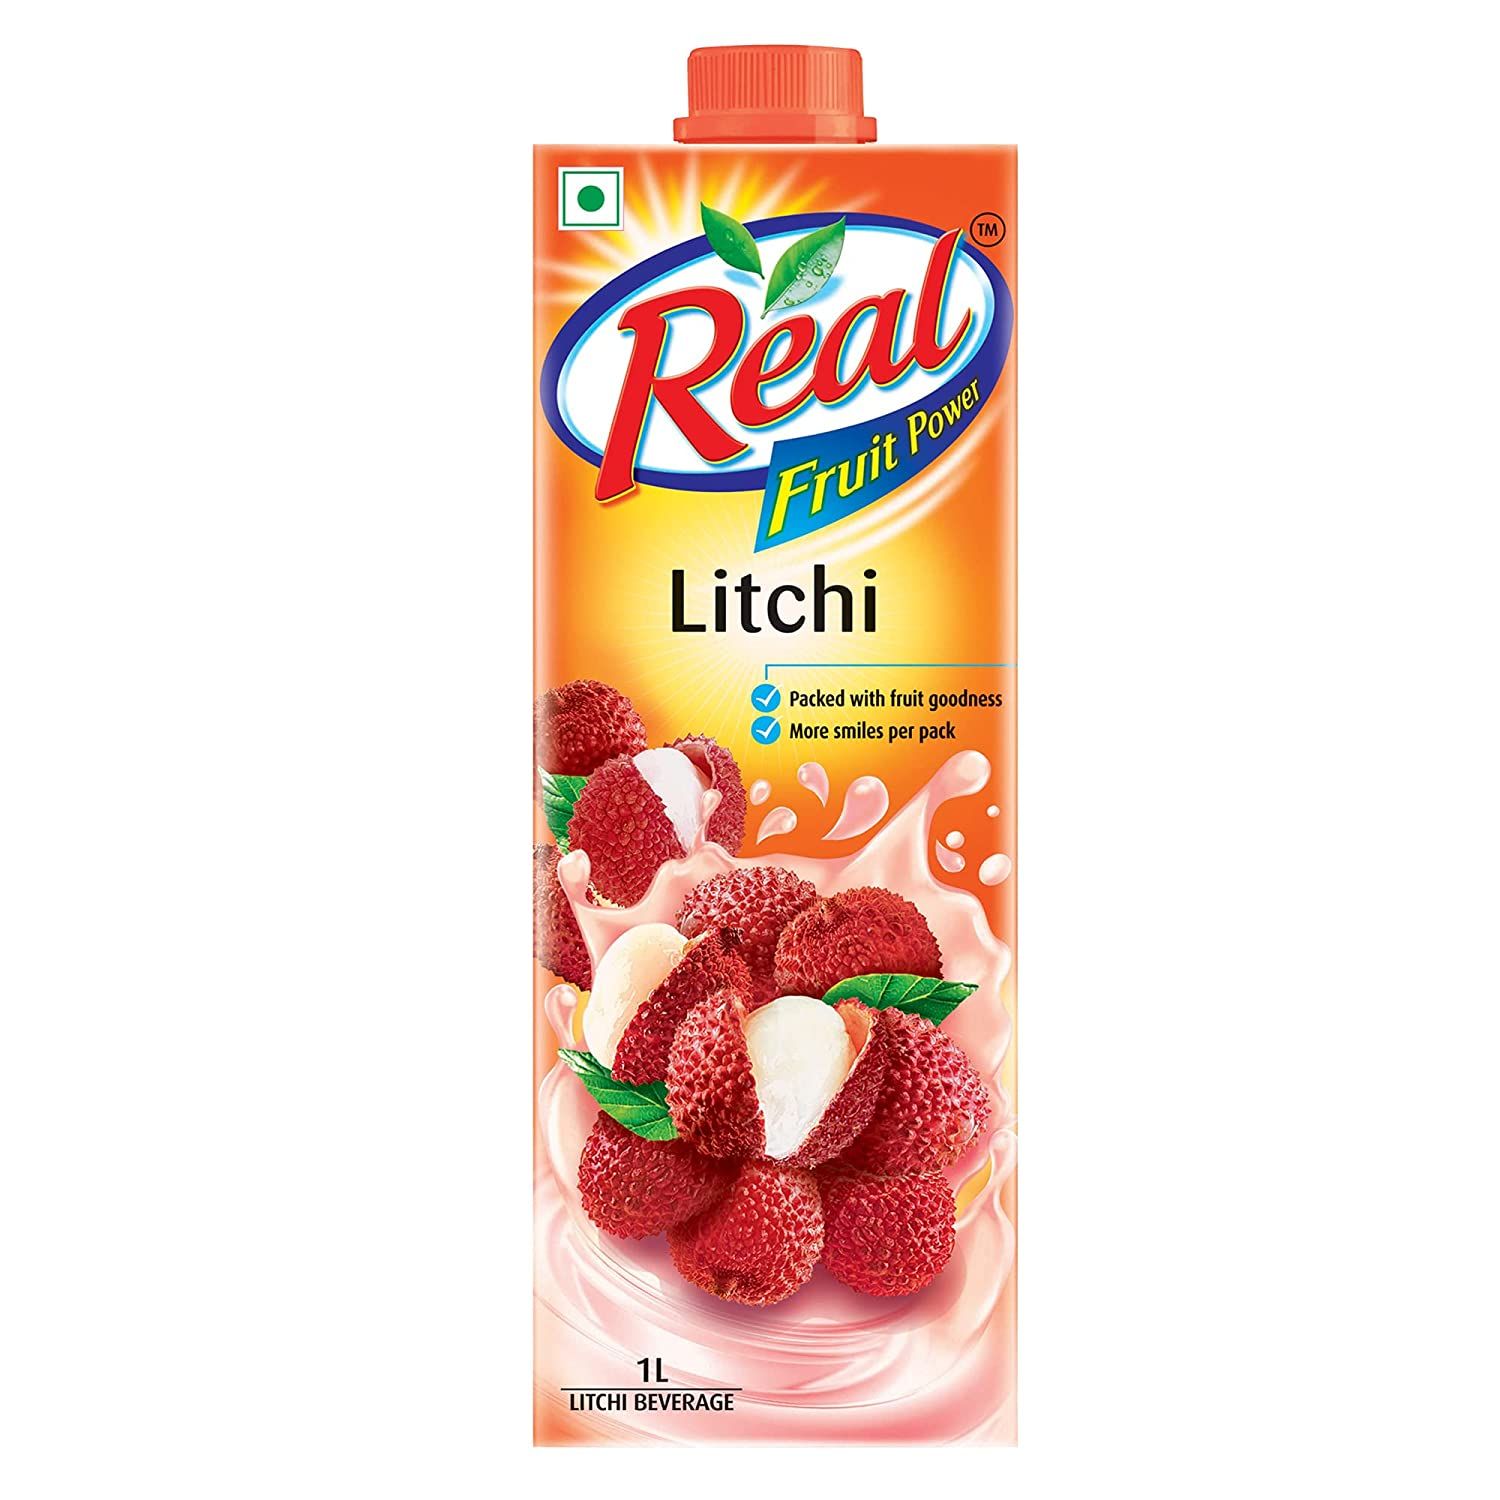 Real Fruit Power Litchi Image